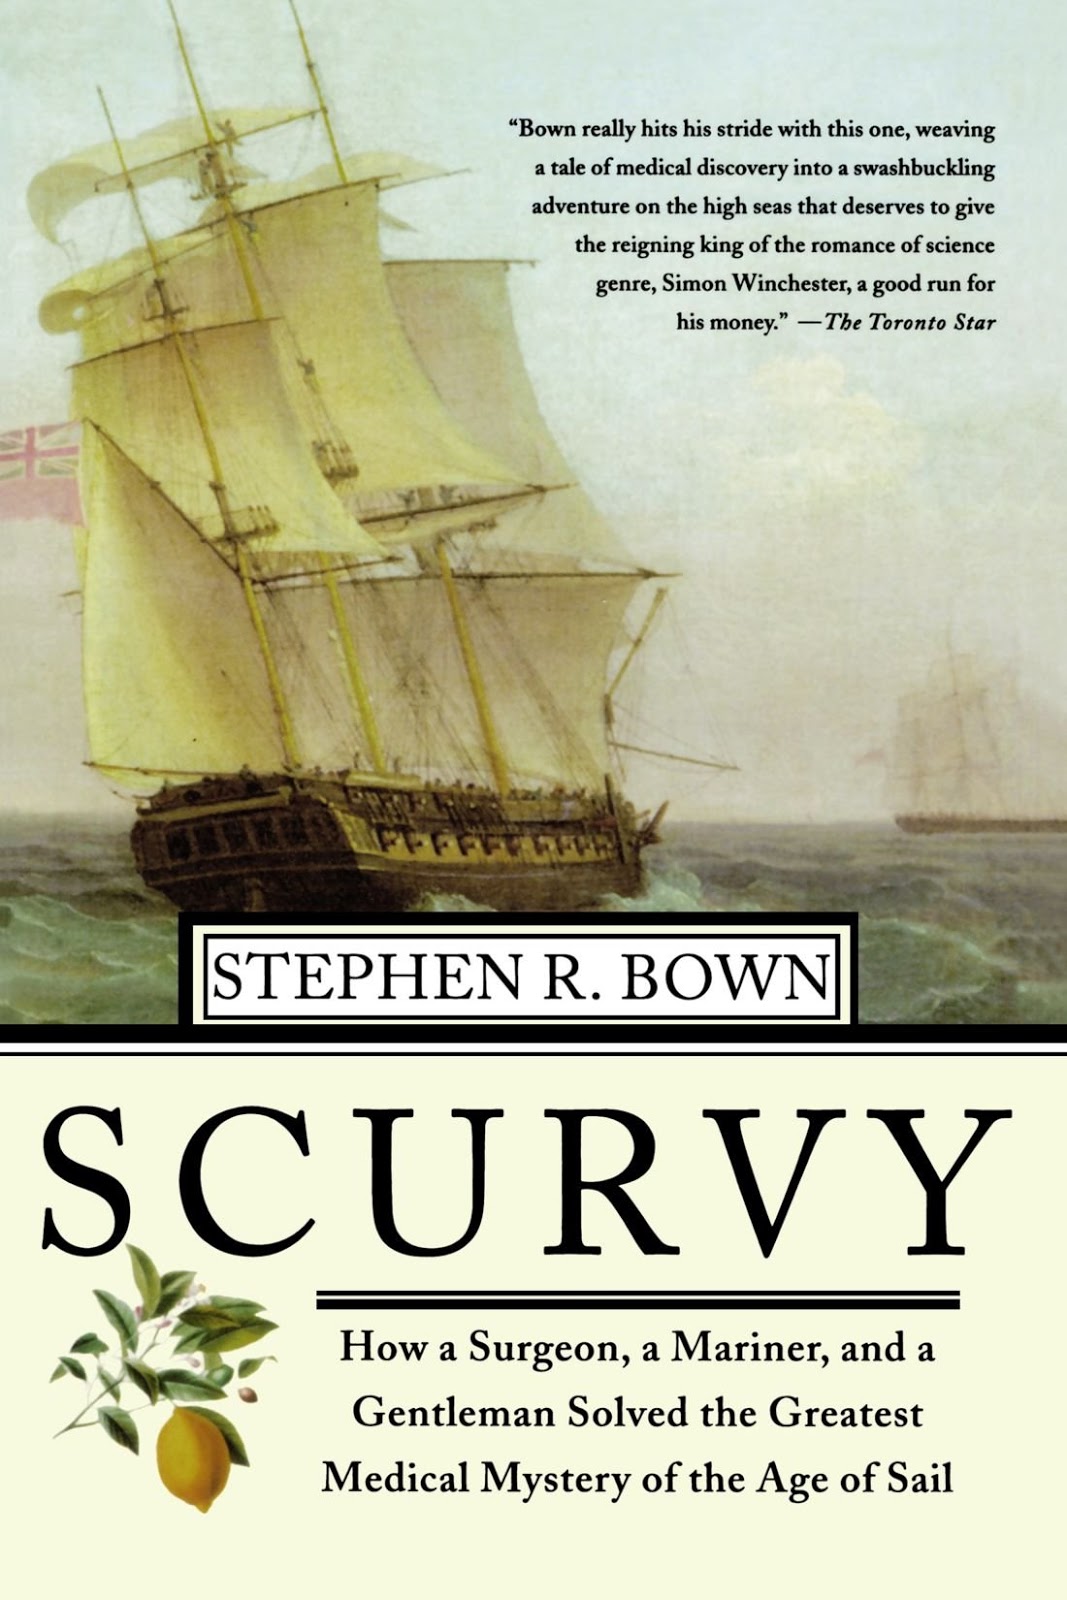 Diary of an Autodidact: Scurvy by Stephen Bown